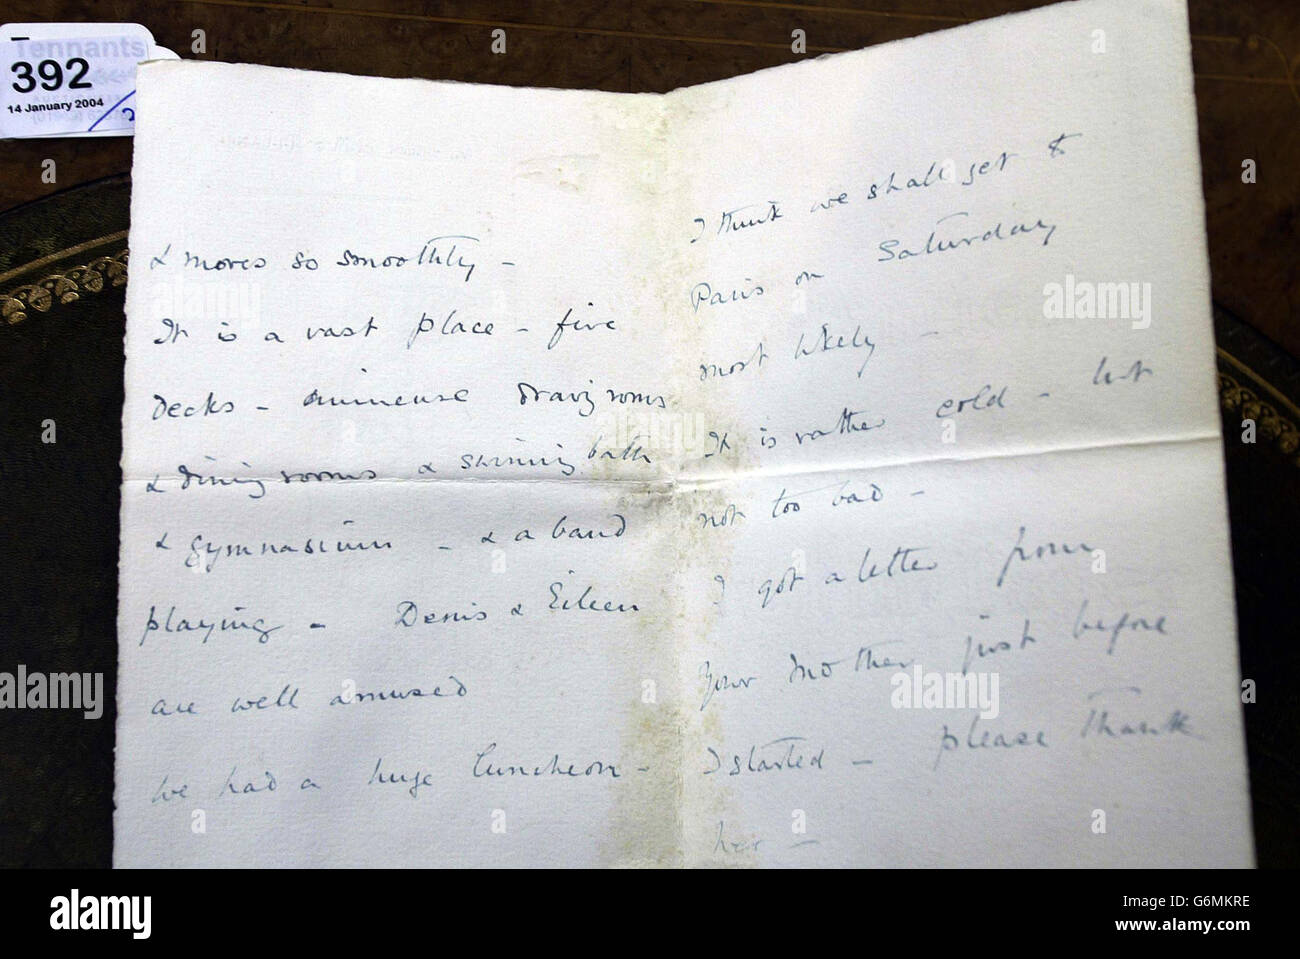 A letter dated April 10, 1912, written on board the RMS Titanic, at Tennants auctioneers in Leyburn, North Yorkshire, that is expected to fetch up to 20,000 an expert said. The letter was written on board the reputedly unsinkable liner on White Star Line RMS Titanic headed notepaper from passenger Miss Alice Lennox-Conyngham - who sailed on the first leg of the cruise, from Southampton to Cherbourg in France - to her nephew Master Alan C Duff, telling how the liner had narrowly avoided a collision even before it left Southampton. Stock Photo